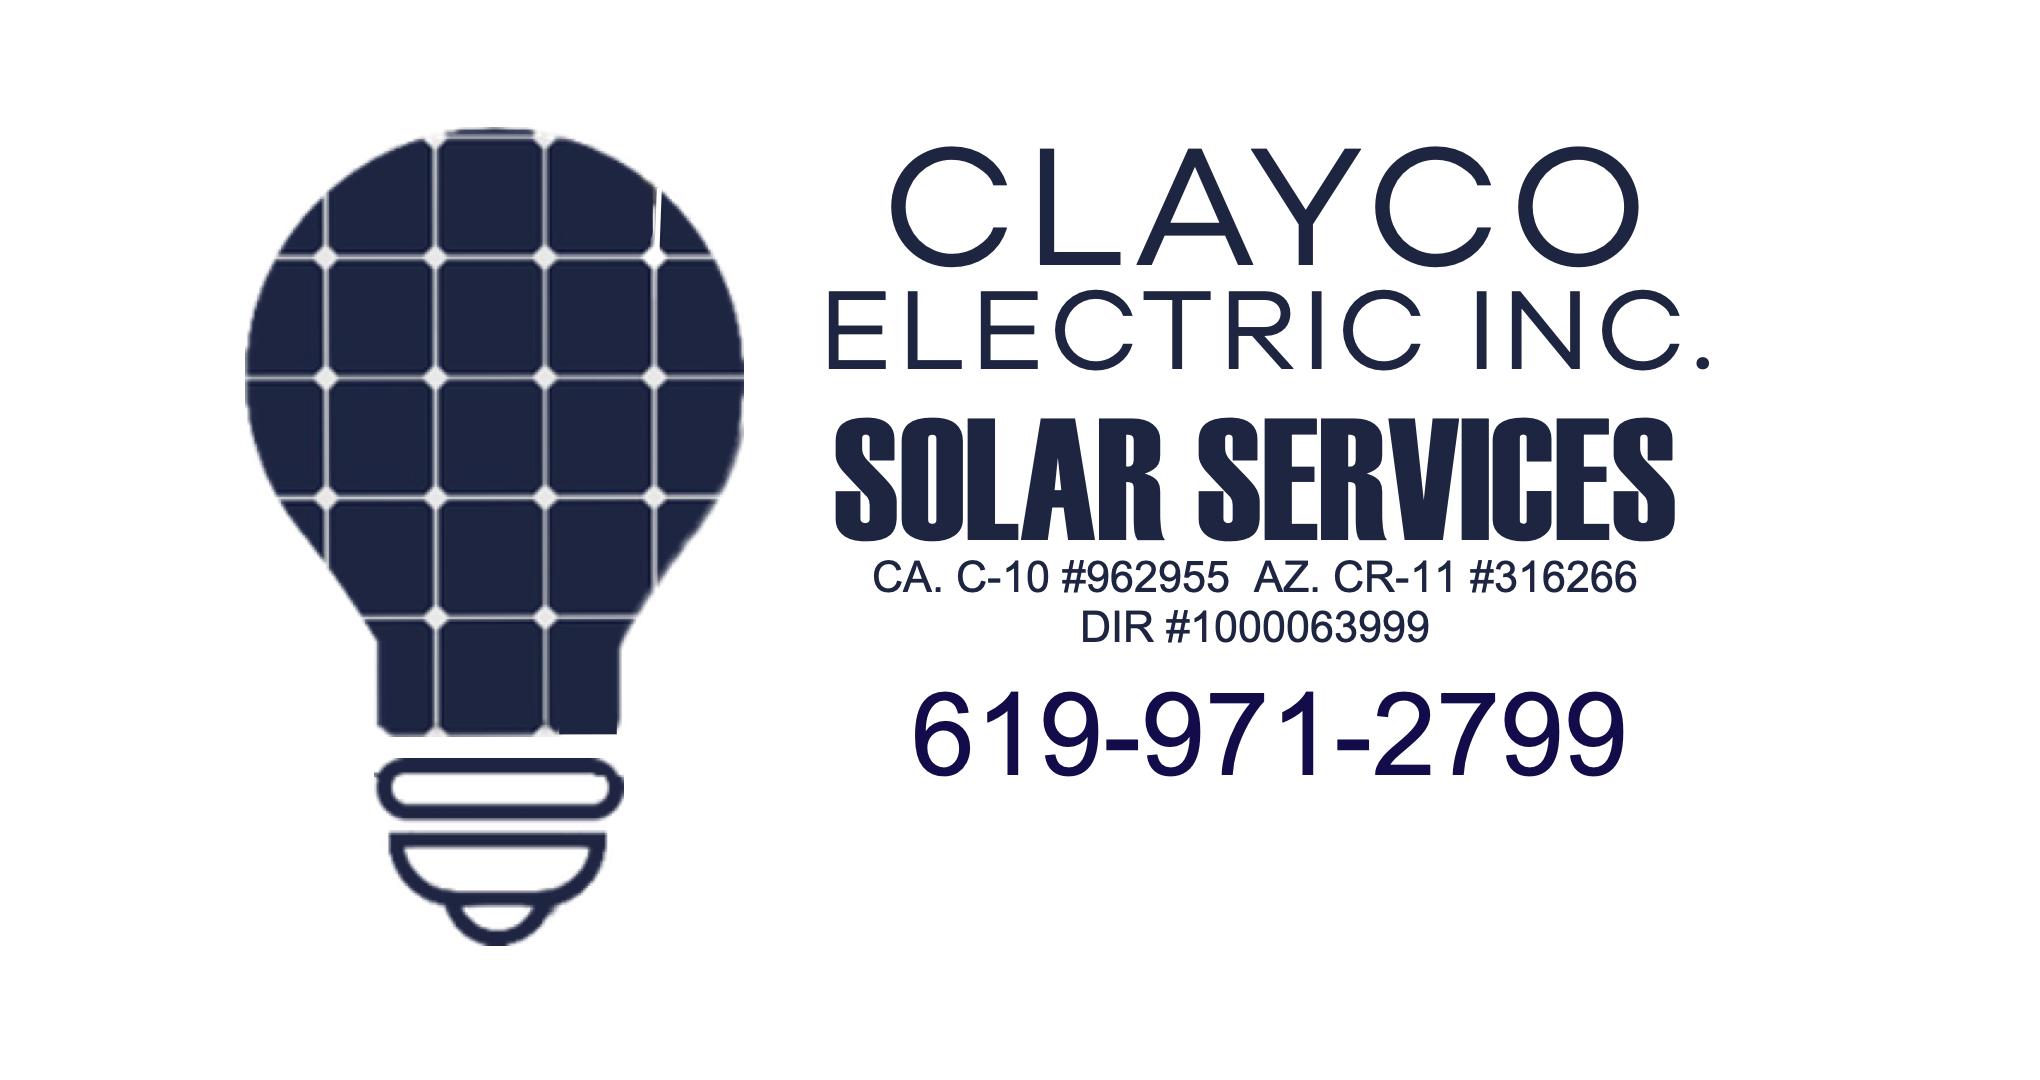 clayco electric